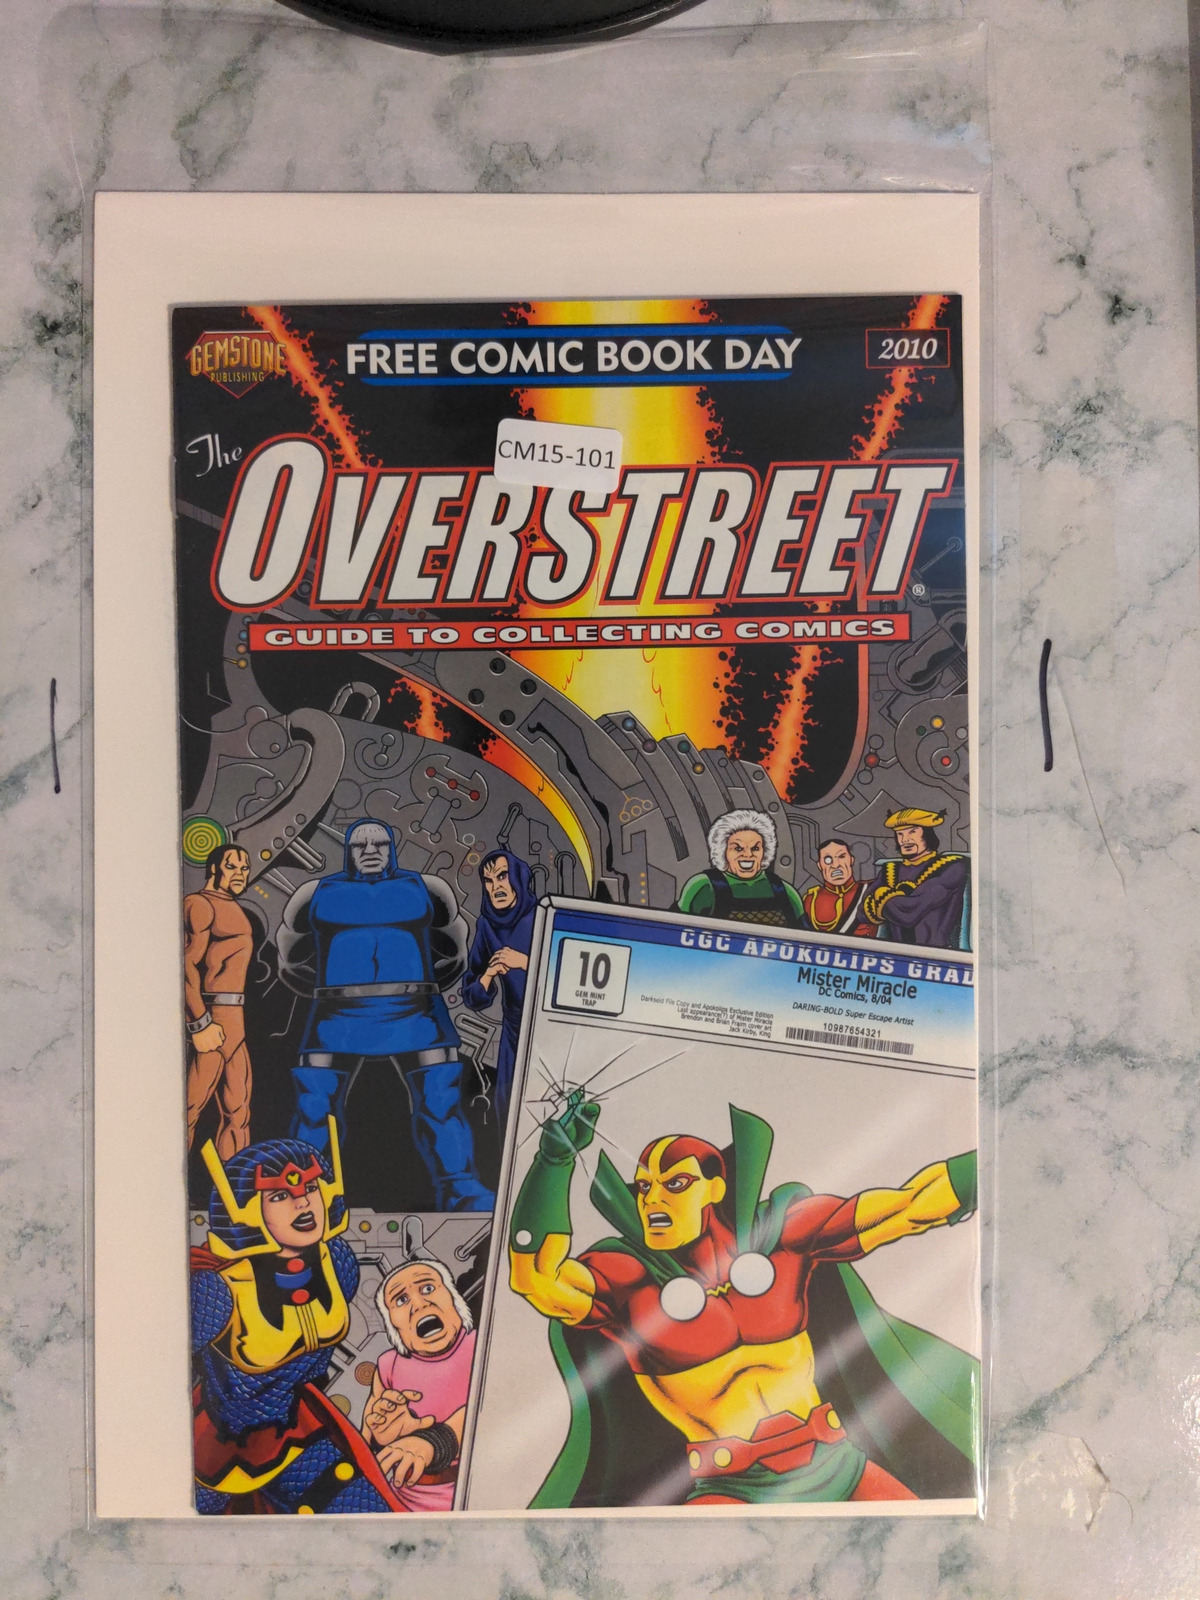 OVERSTREET: GUIDE TO COLLECTING COMICS - FCBD EDITION #2010 9.2 CM15-101